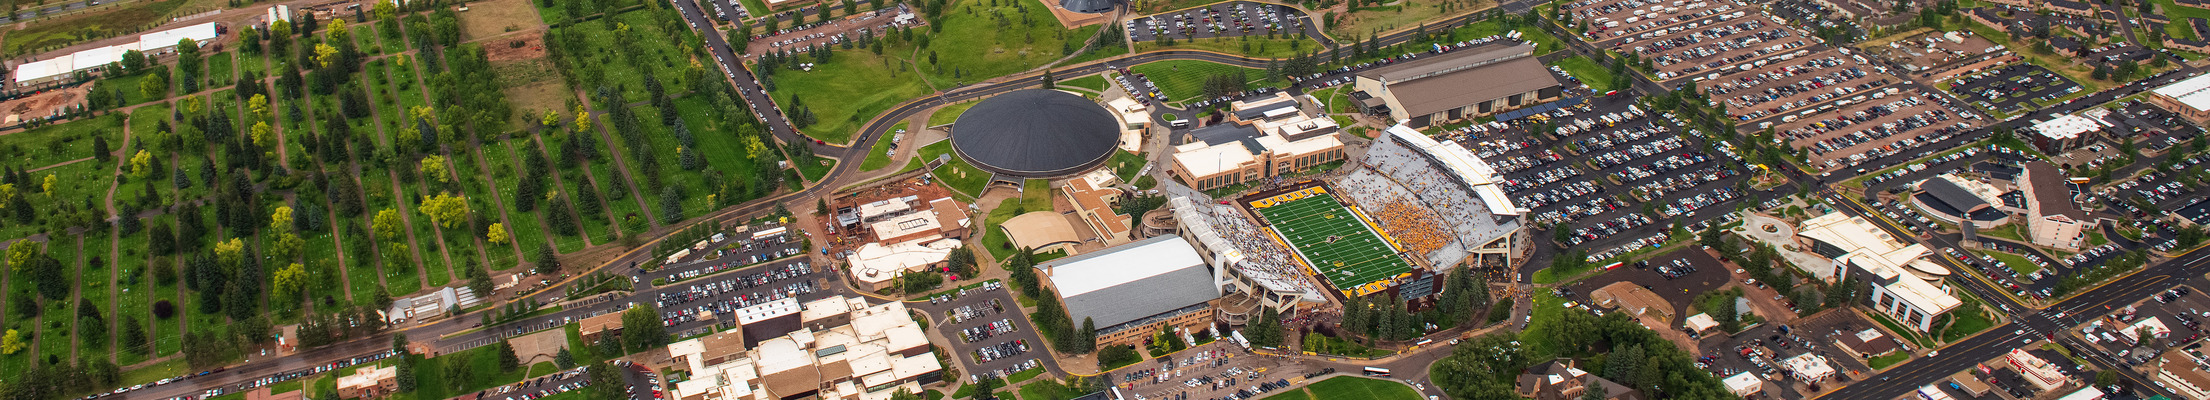 A wide aerial view of UW's campus and the War Memorial Stadium